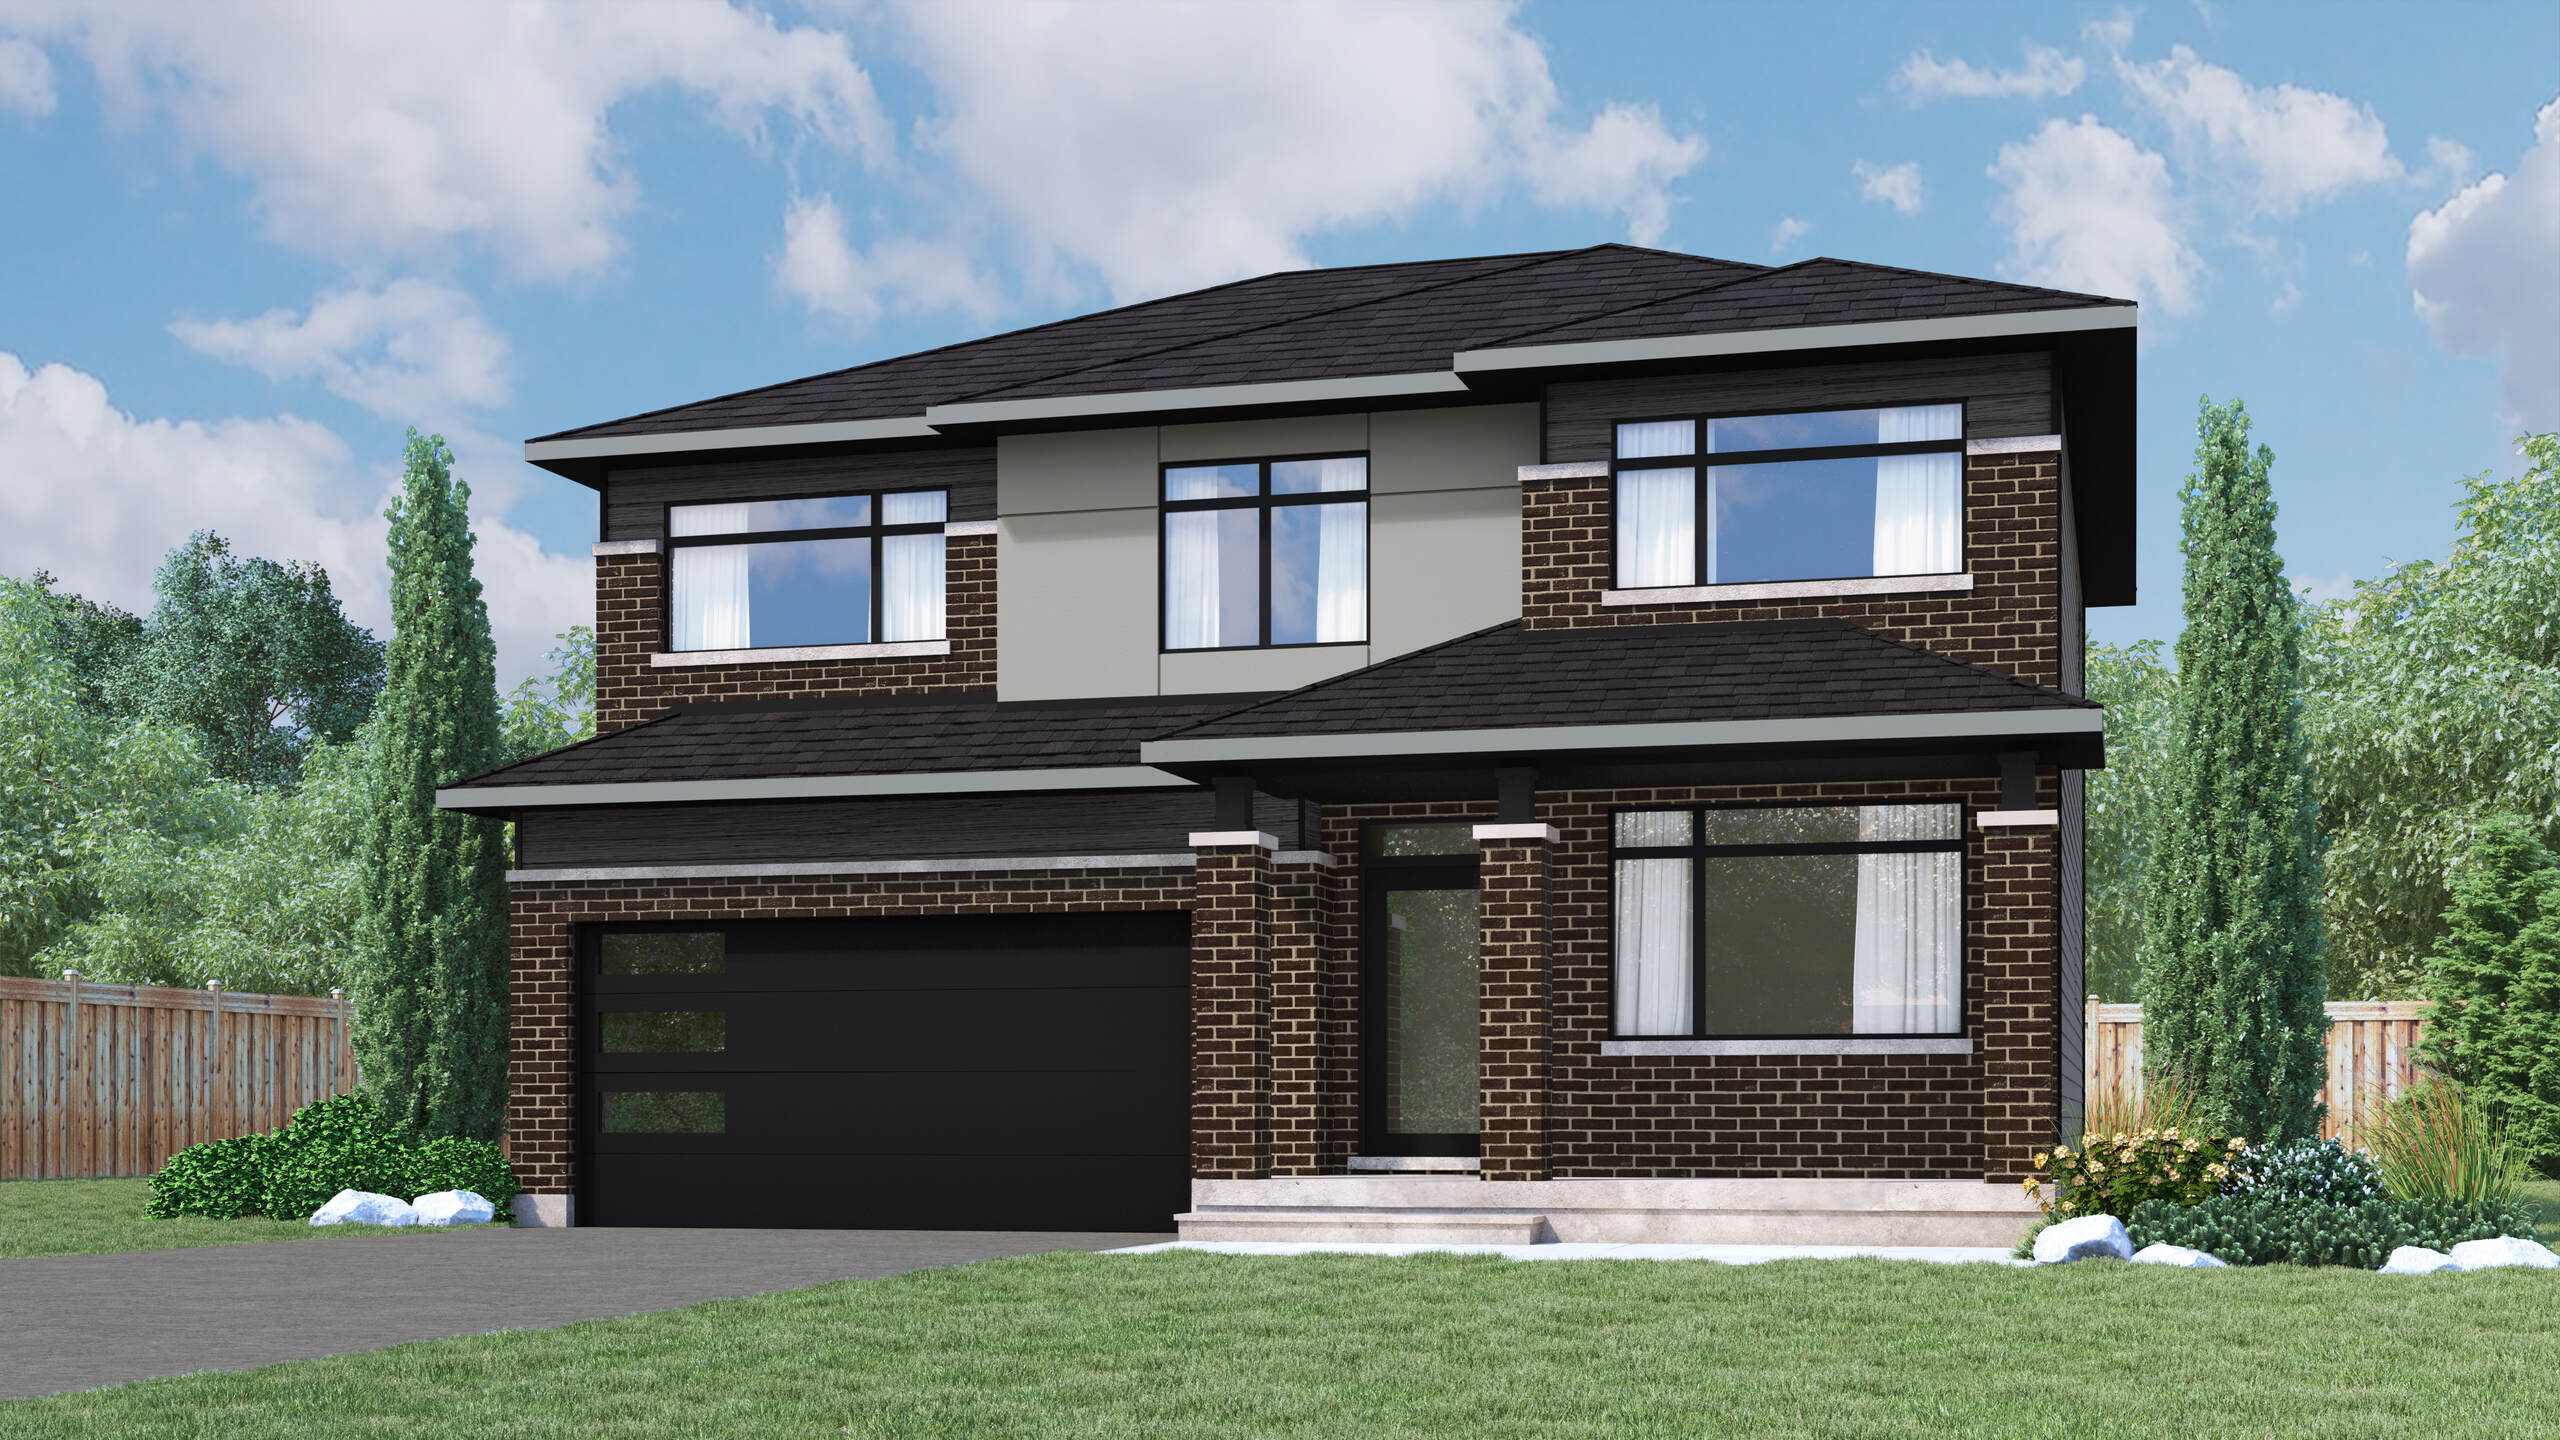 Image of Home Elevation C - Coventry